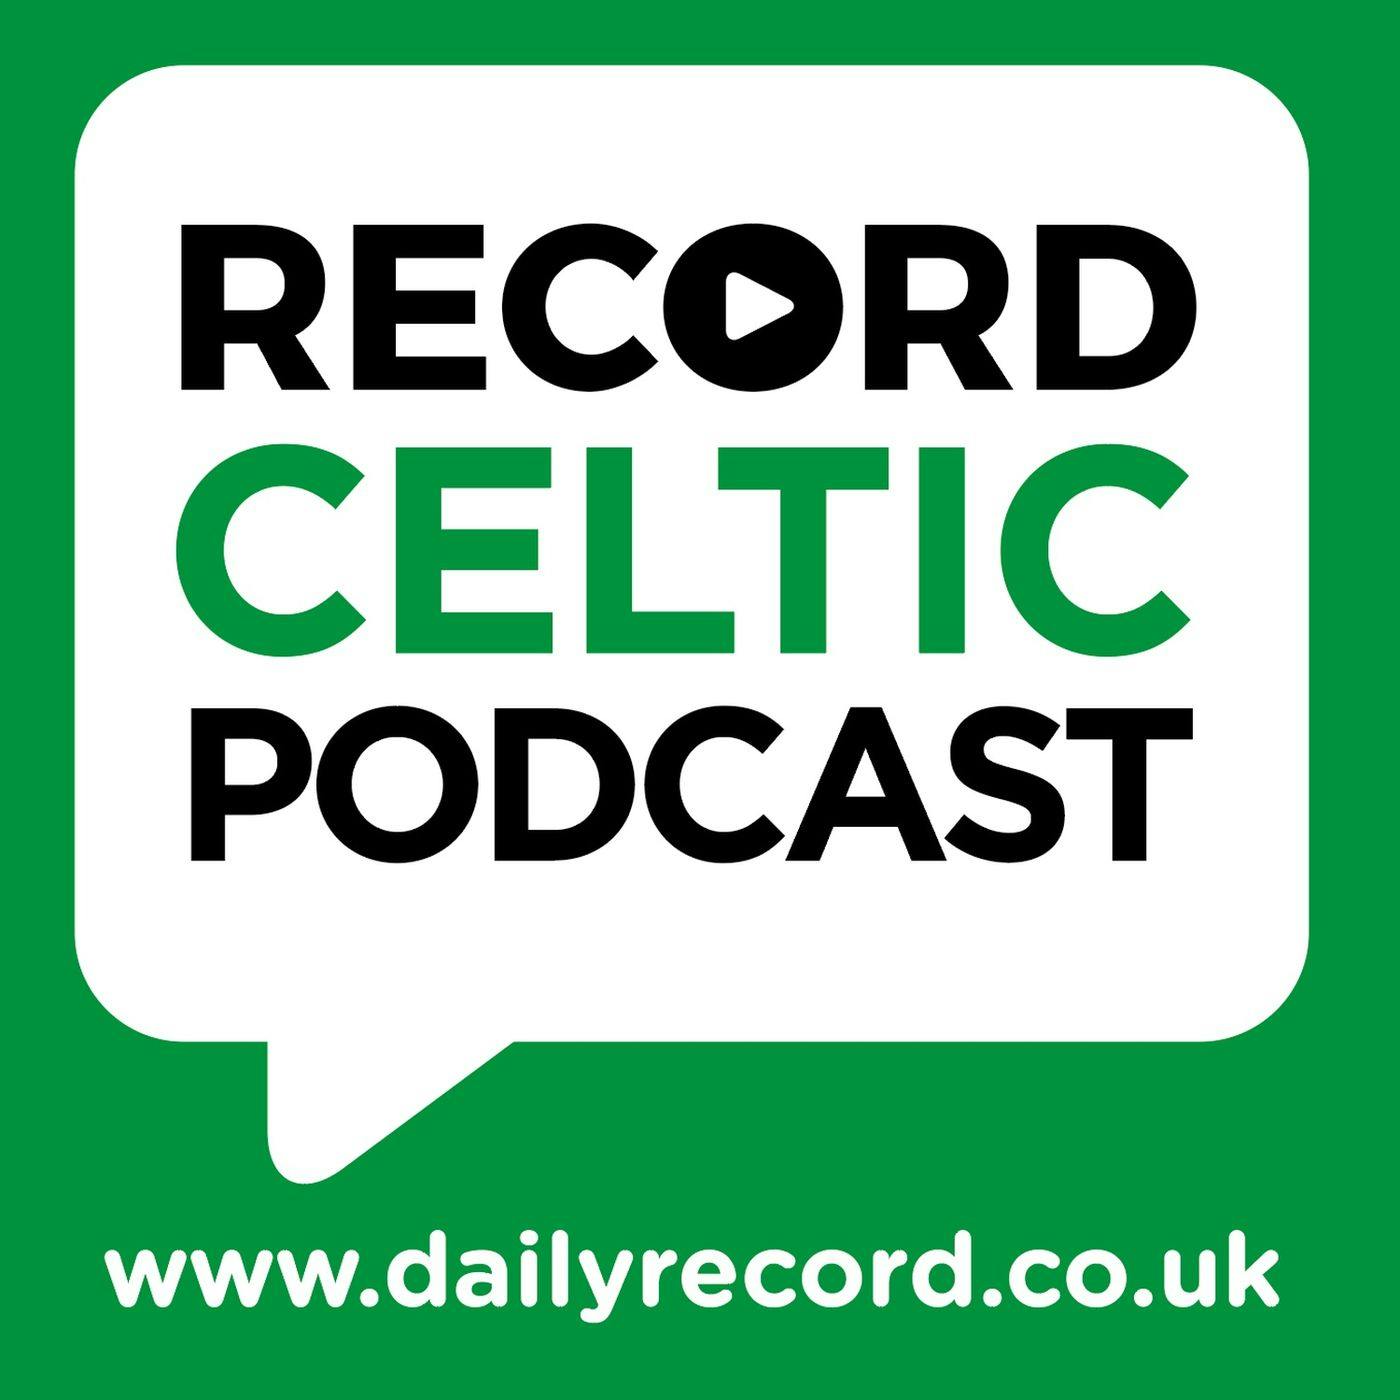 Derby glory for Hoops, Scott Brown’s pivotal role and how Neil Lennon deserves the job full time